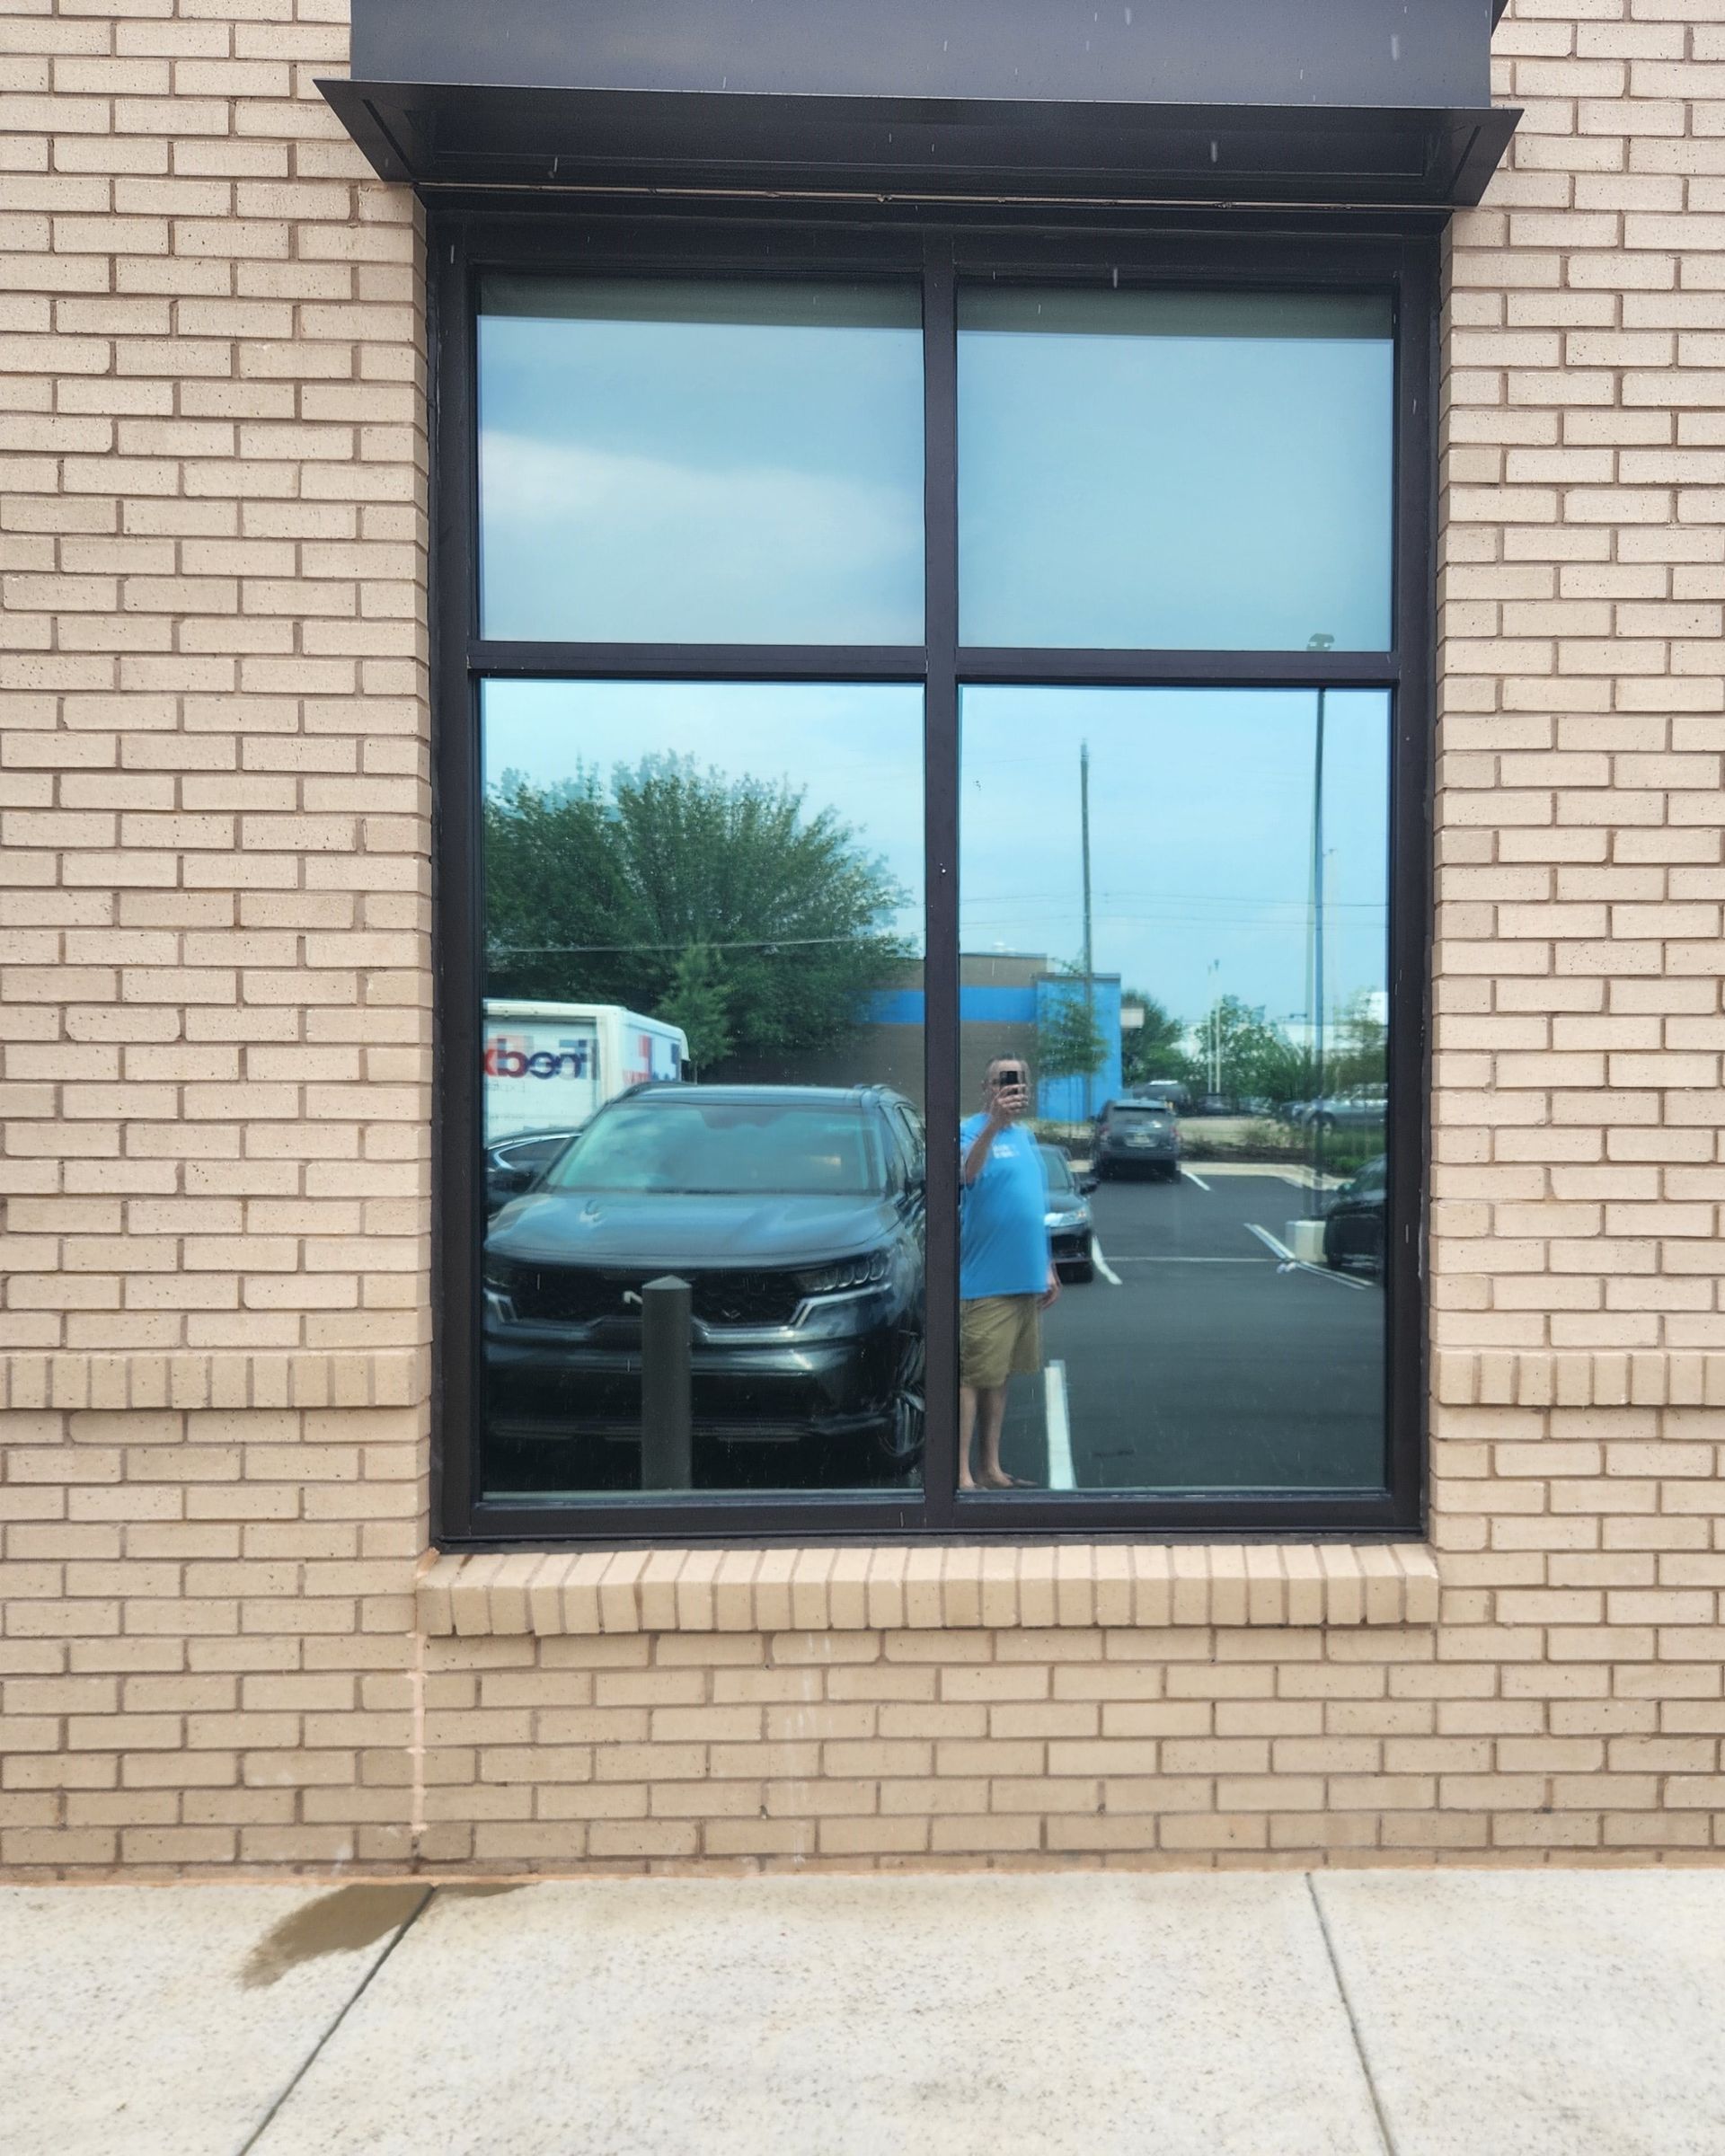 commercial tinting - SPF commercial window tint blocks maximum heat at Chick-fil-a restaurant in Montgomery AL